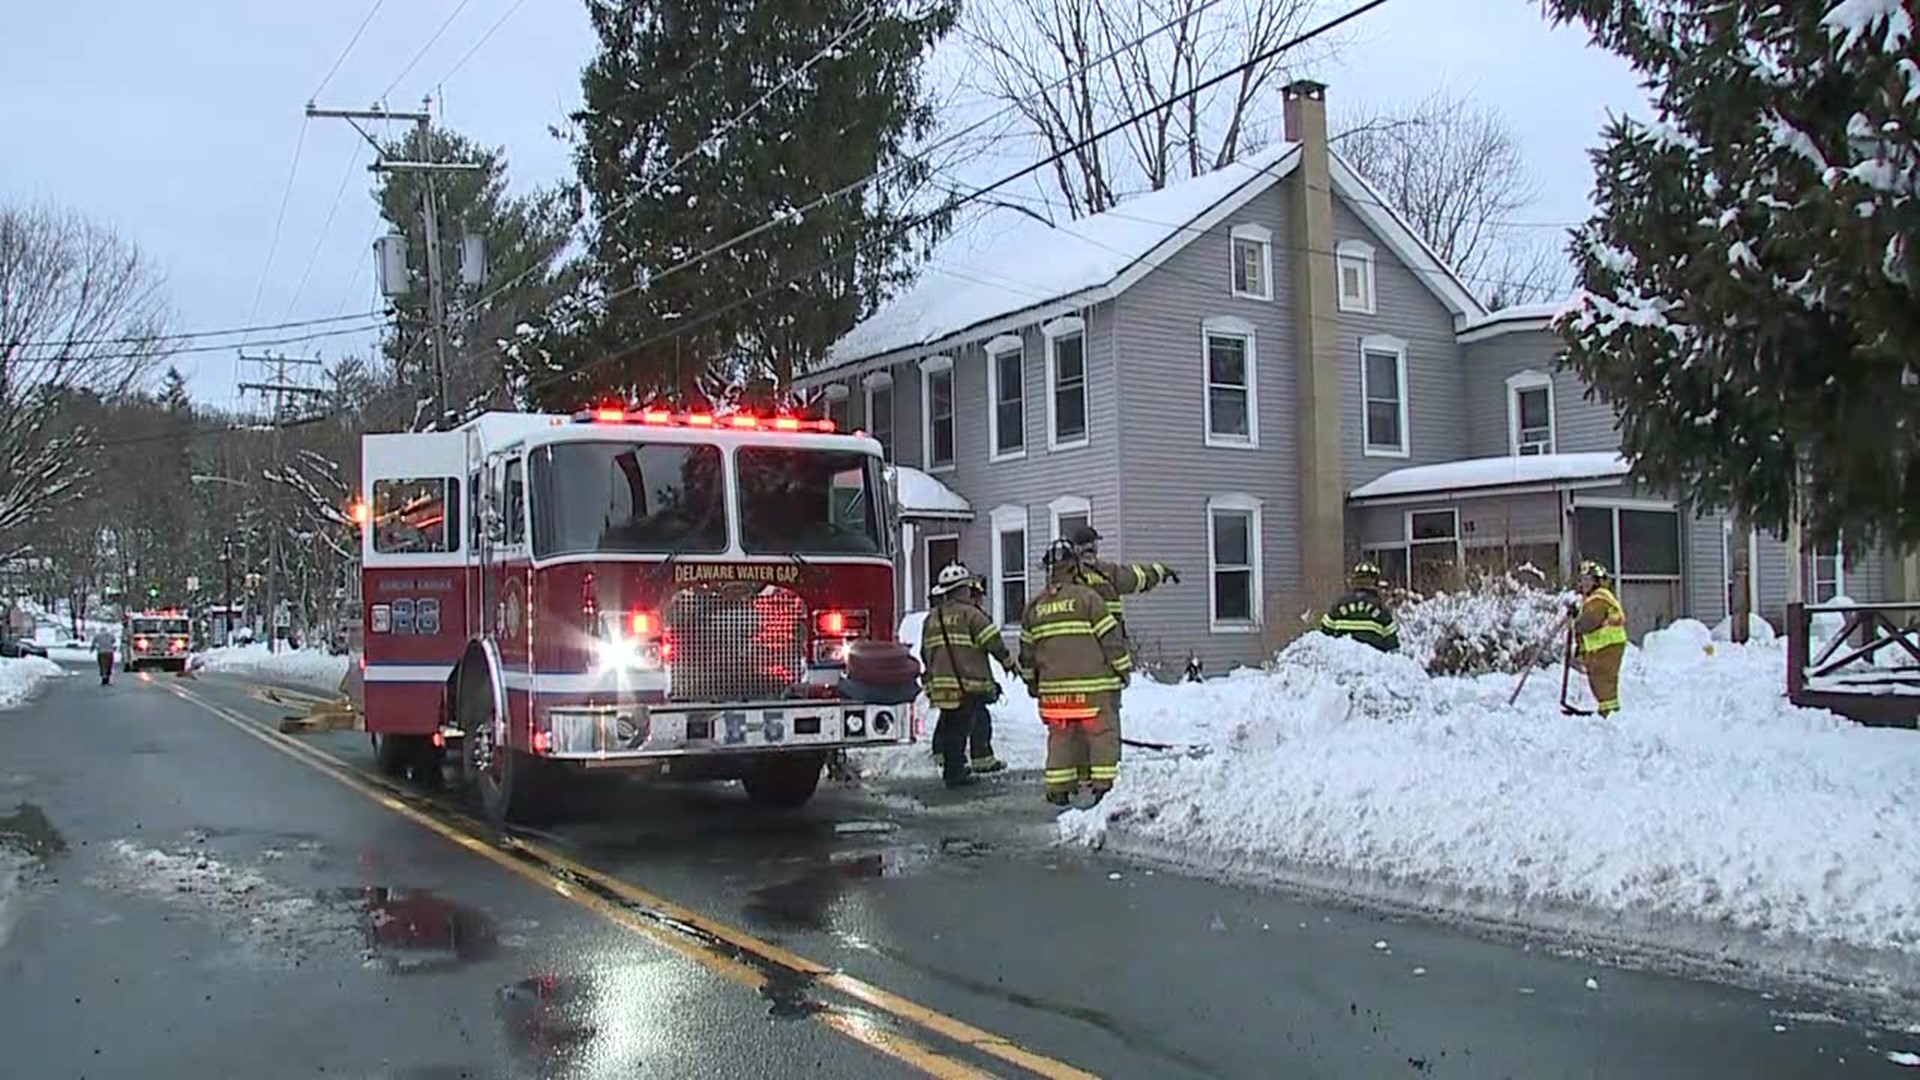 Fire crews say an electrical issue with the dryer sparked flames in one home.